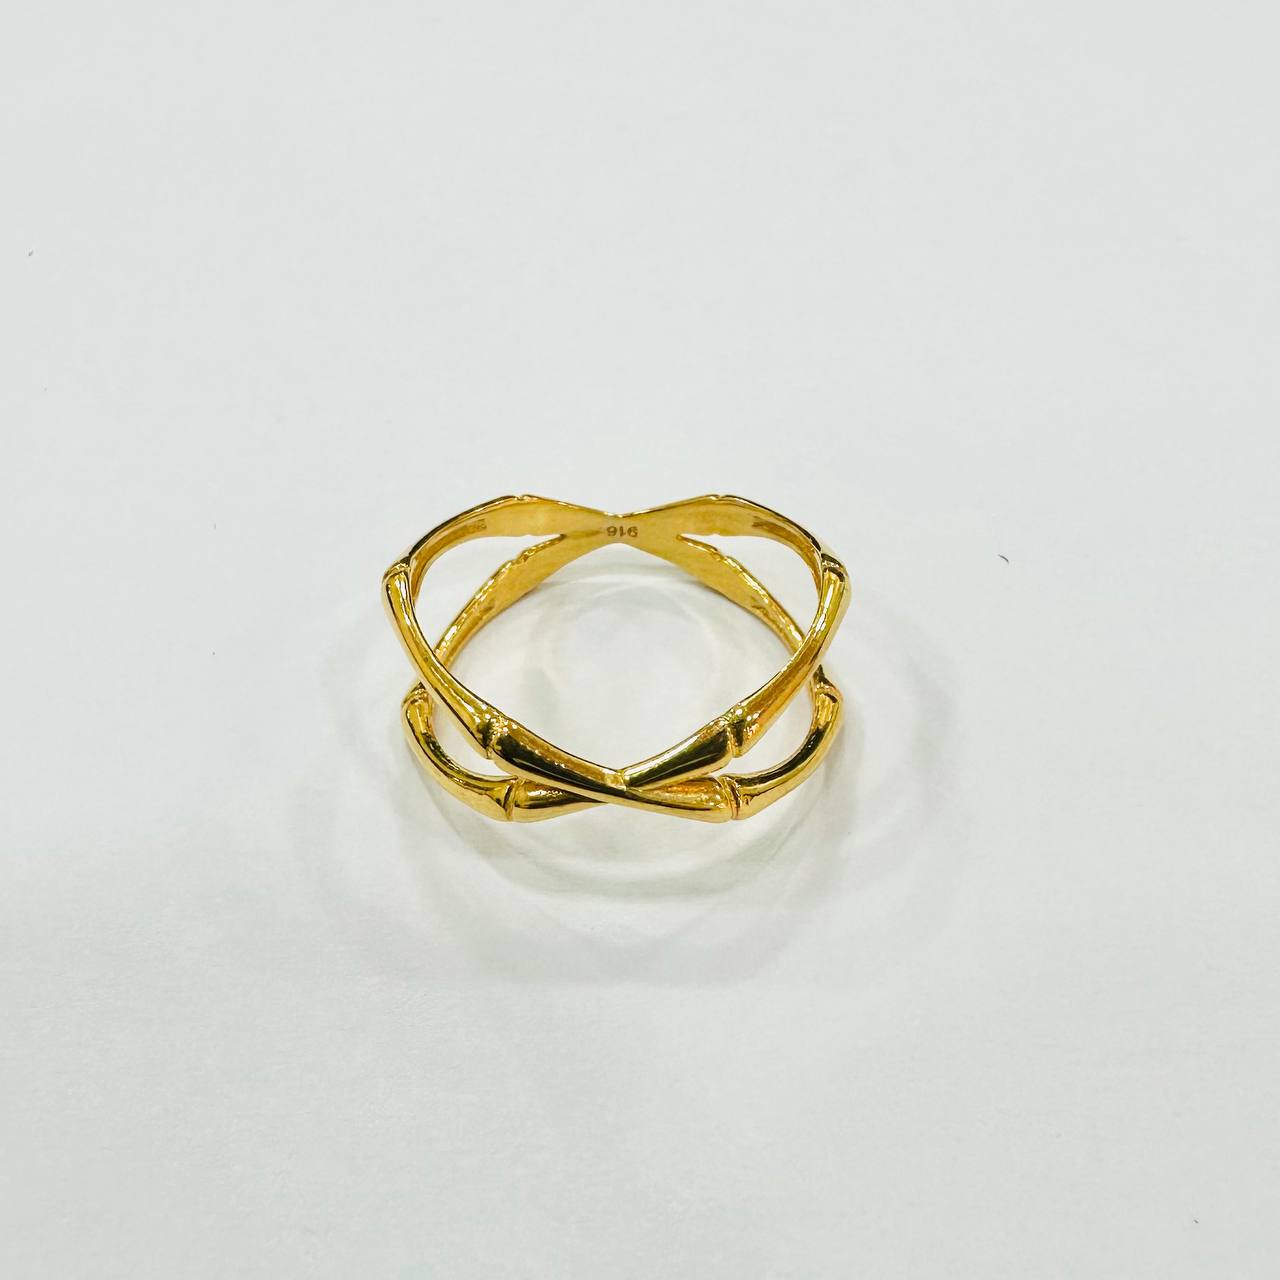 22k / 916 Gold Italy design Bamboo Ring-916 gold-Best Gold Shop